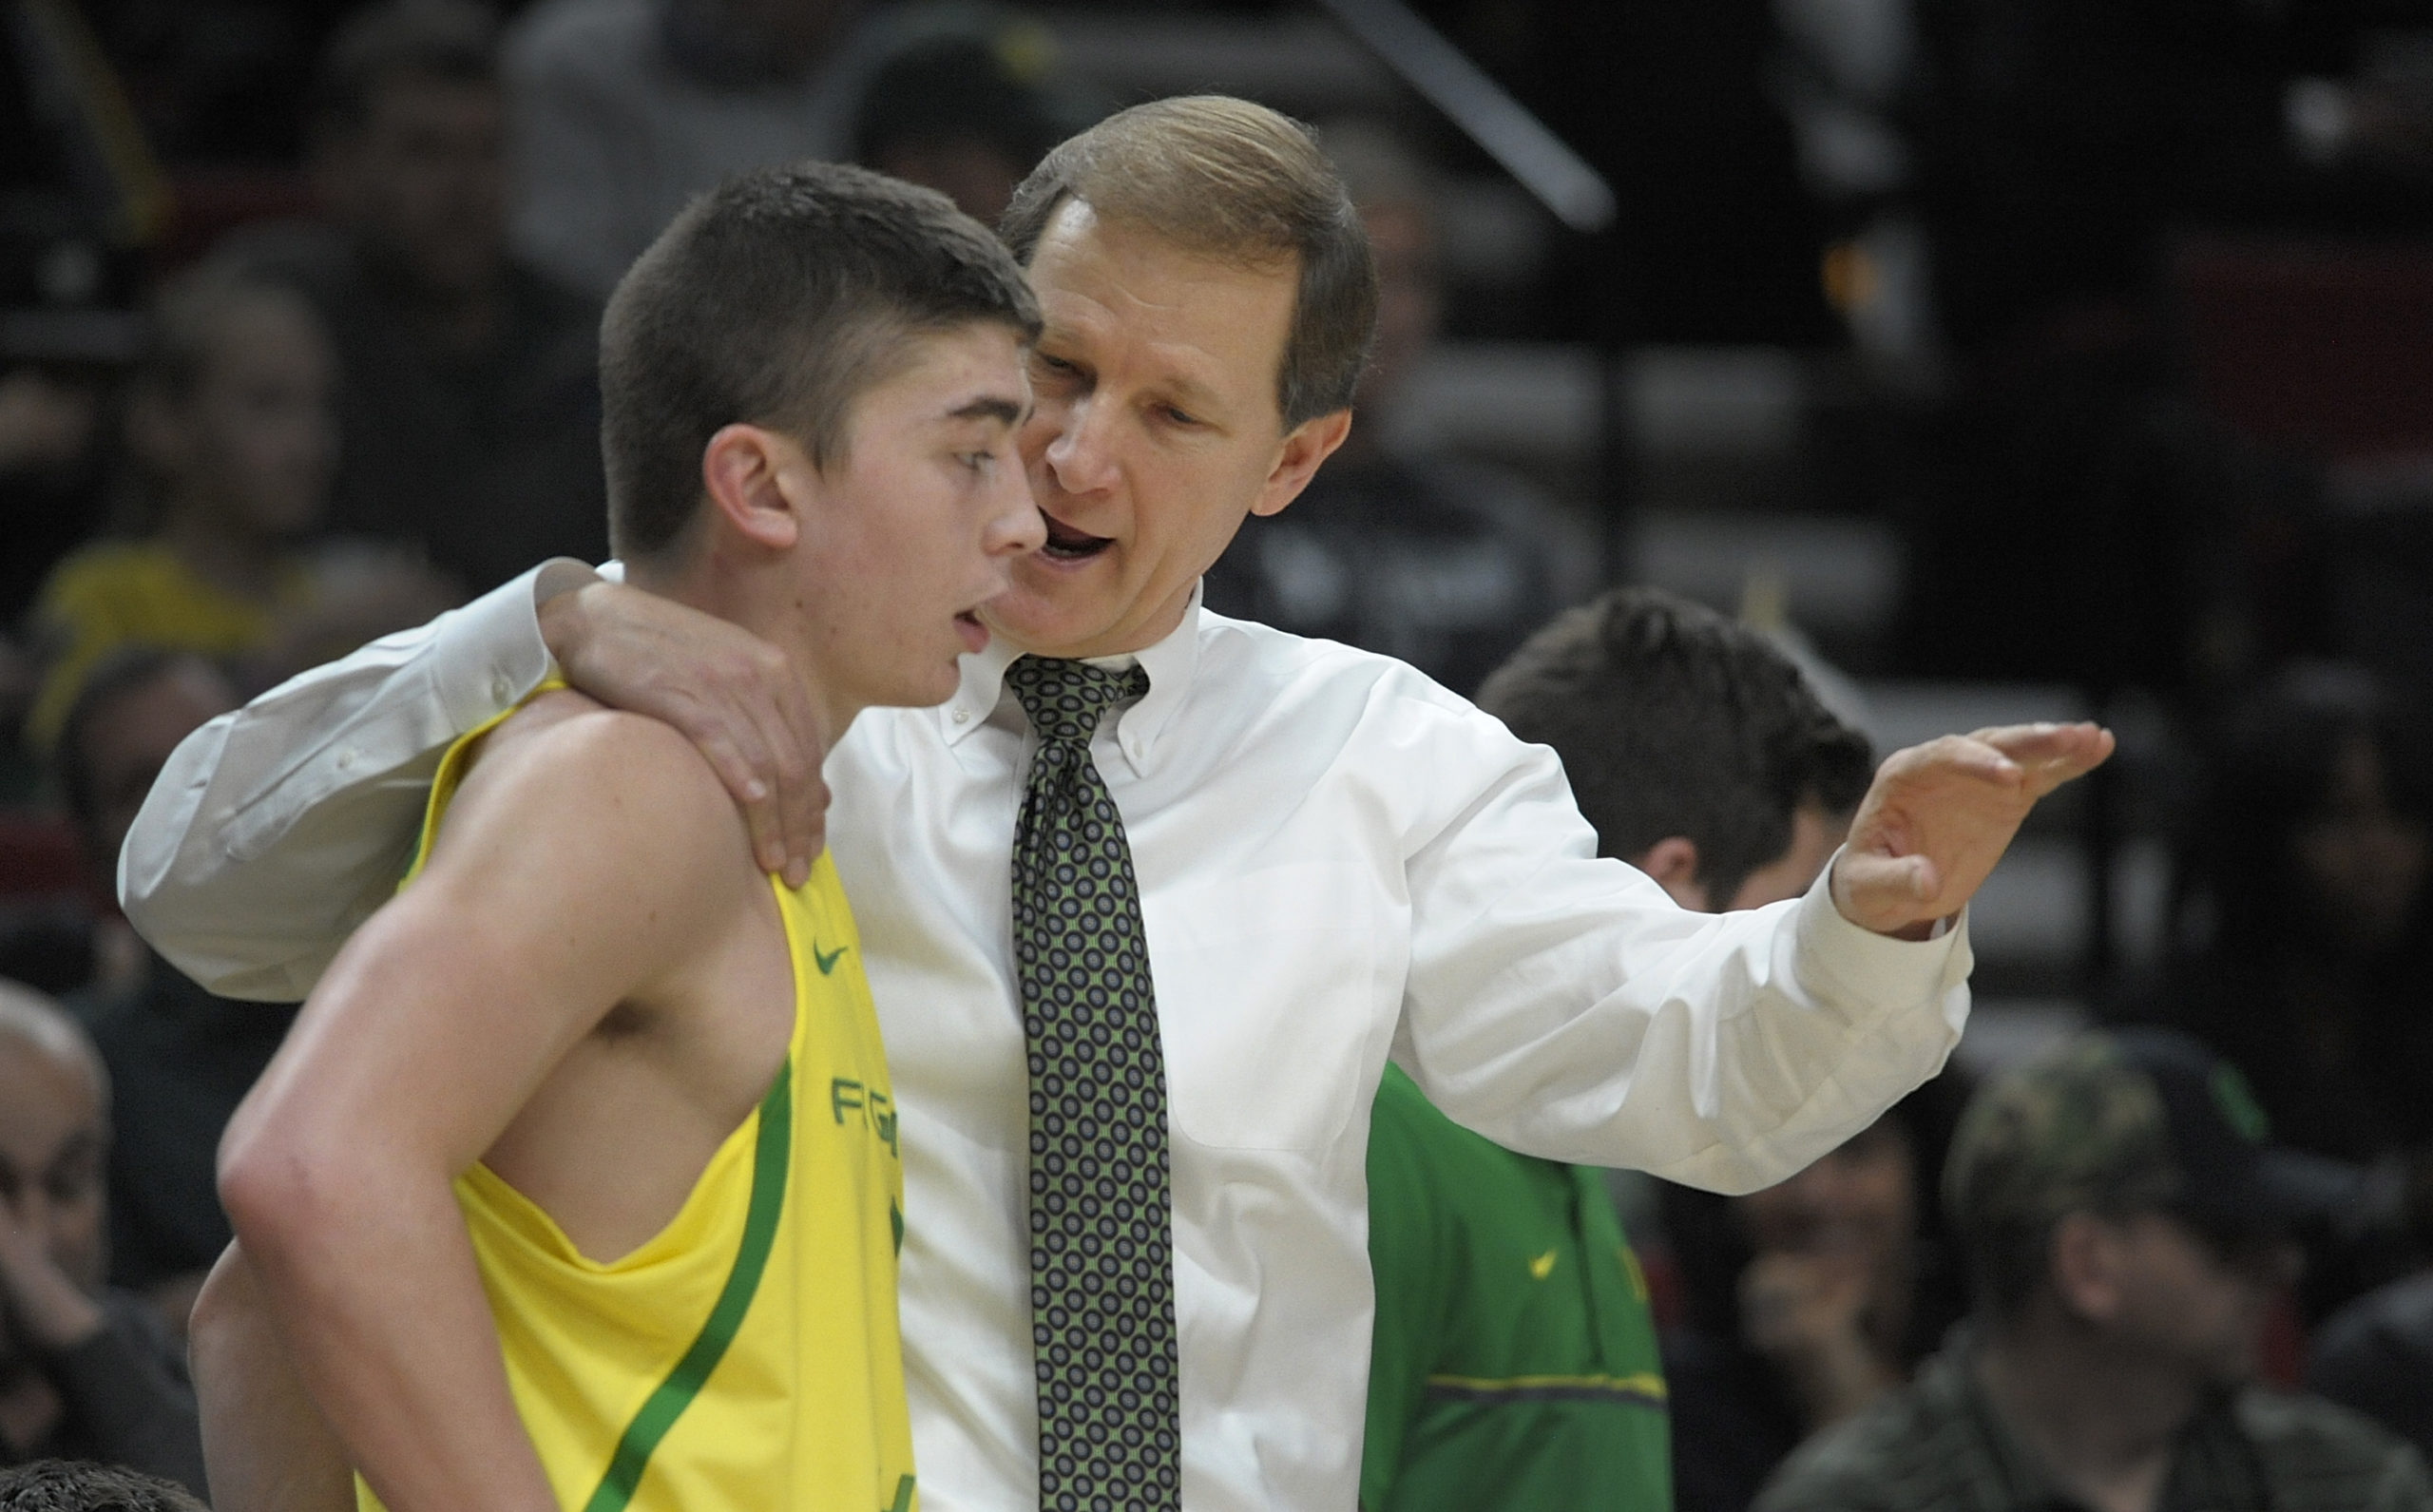 PORTLAND, OR - DECEMBER 17: Head coach Dana Altman of the Oregon Ducks speaks with Payton Pritchard #3 during the second half of the game against the UNLV Rebels at Moda Center on December 17, 2016 in Portland, Oregon.The Ducks won the game 83-63. 